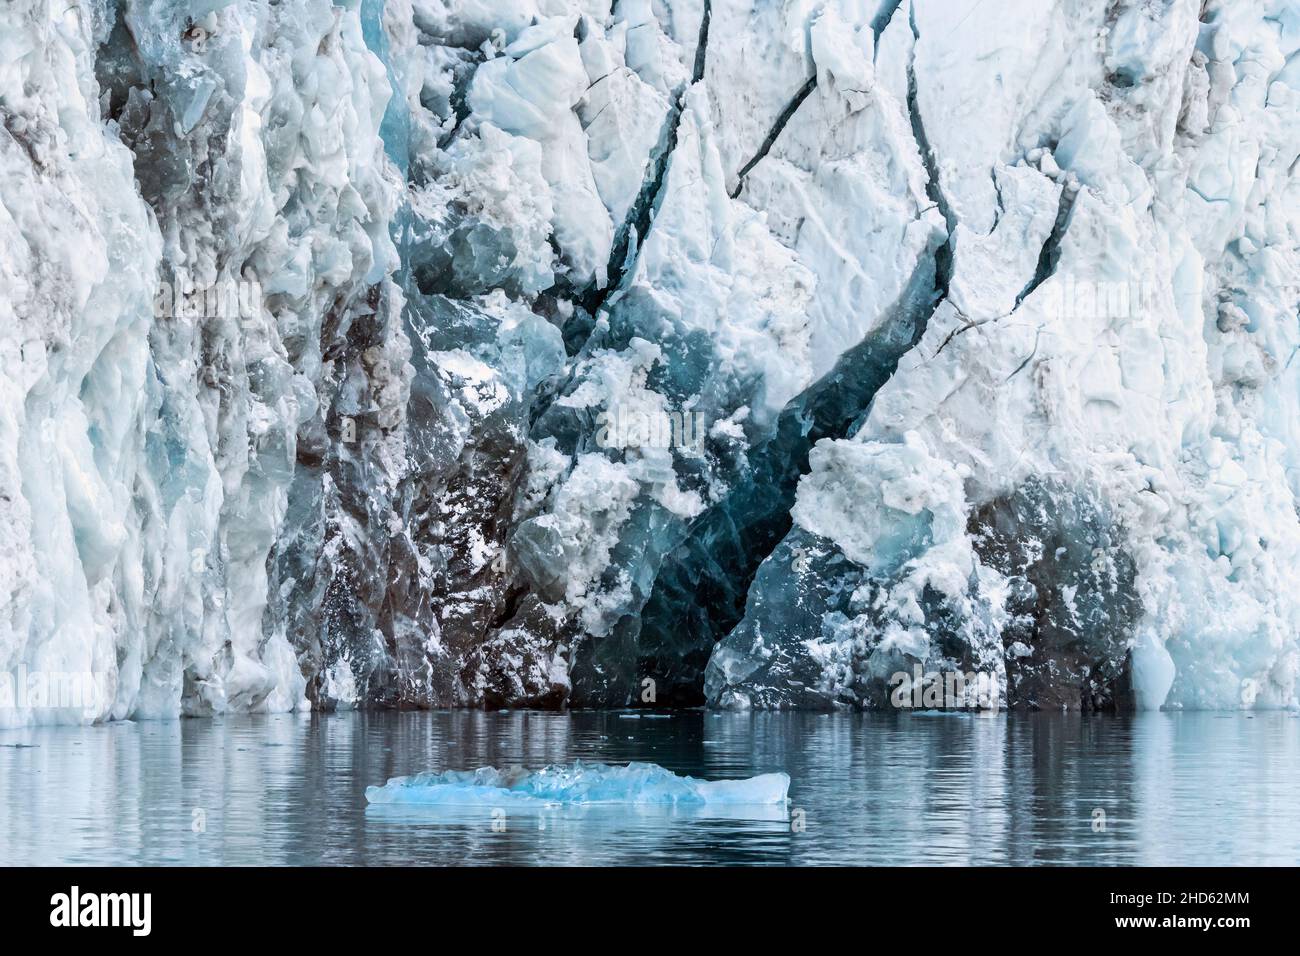 Crystalline ice at the glacier front, Rolige Brae Glacier, Rodefjord, Scoresby Sund, Greenland Stock Photo